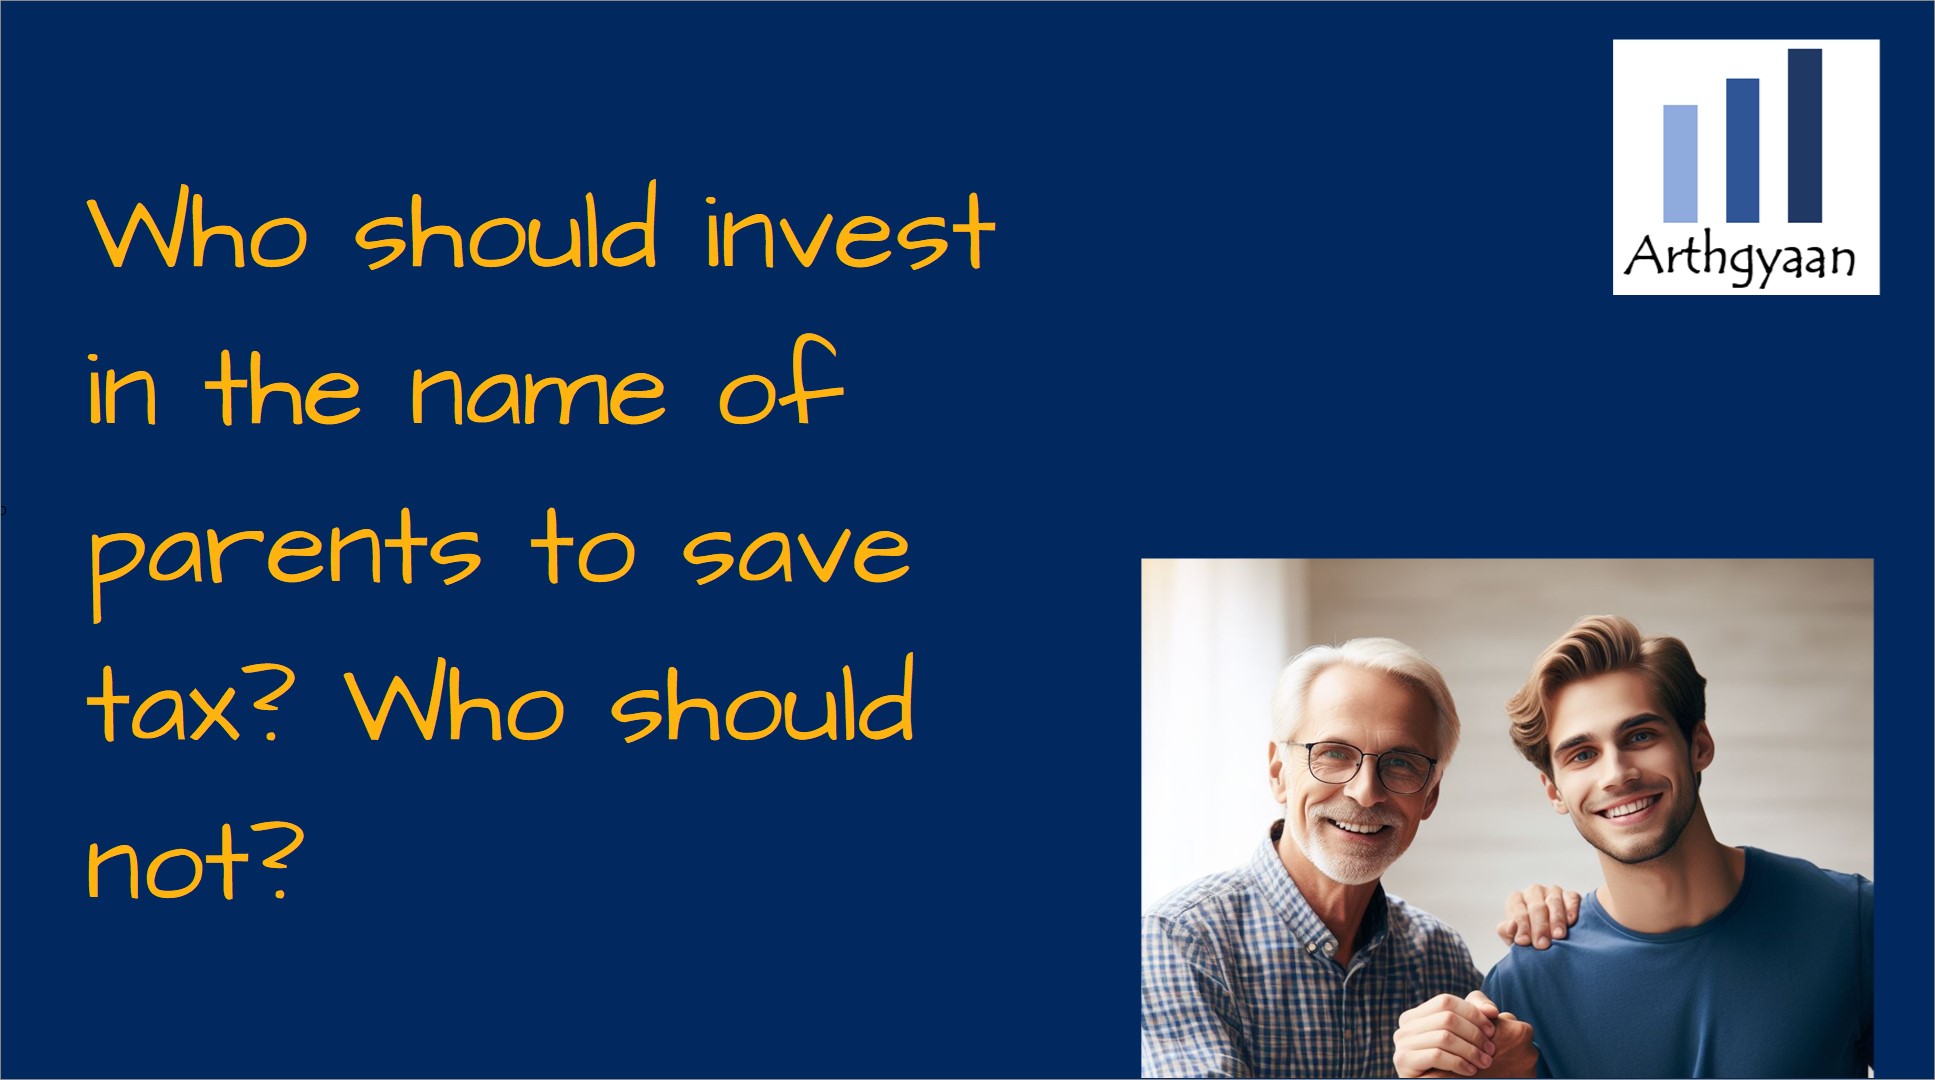 Who should invest in the name of parents to save tax? Who should not?